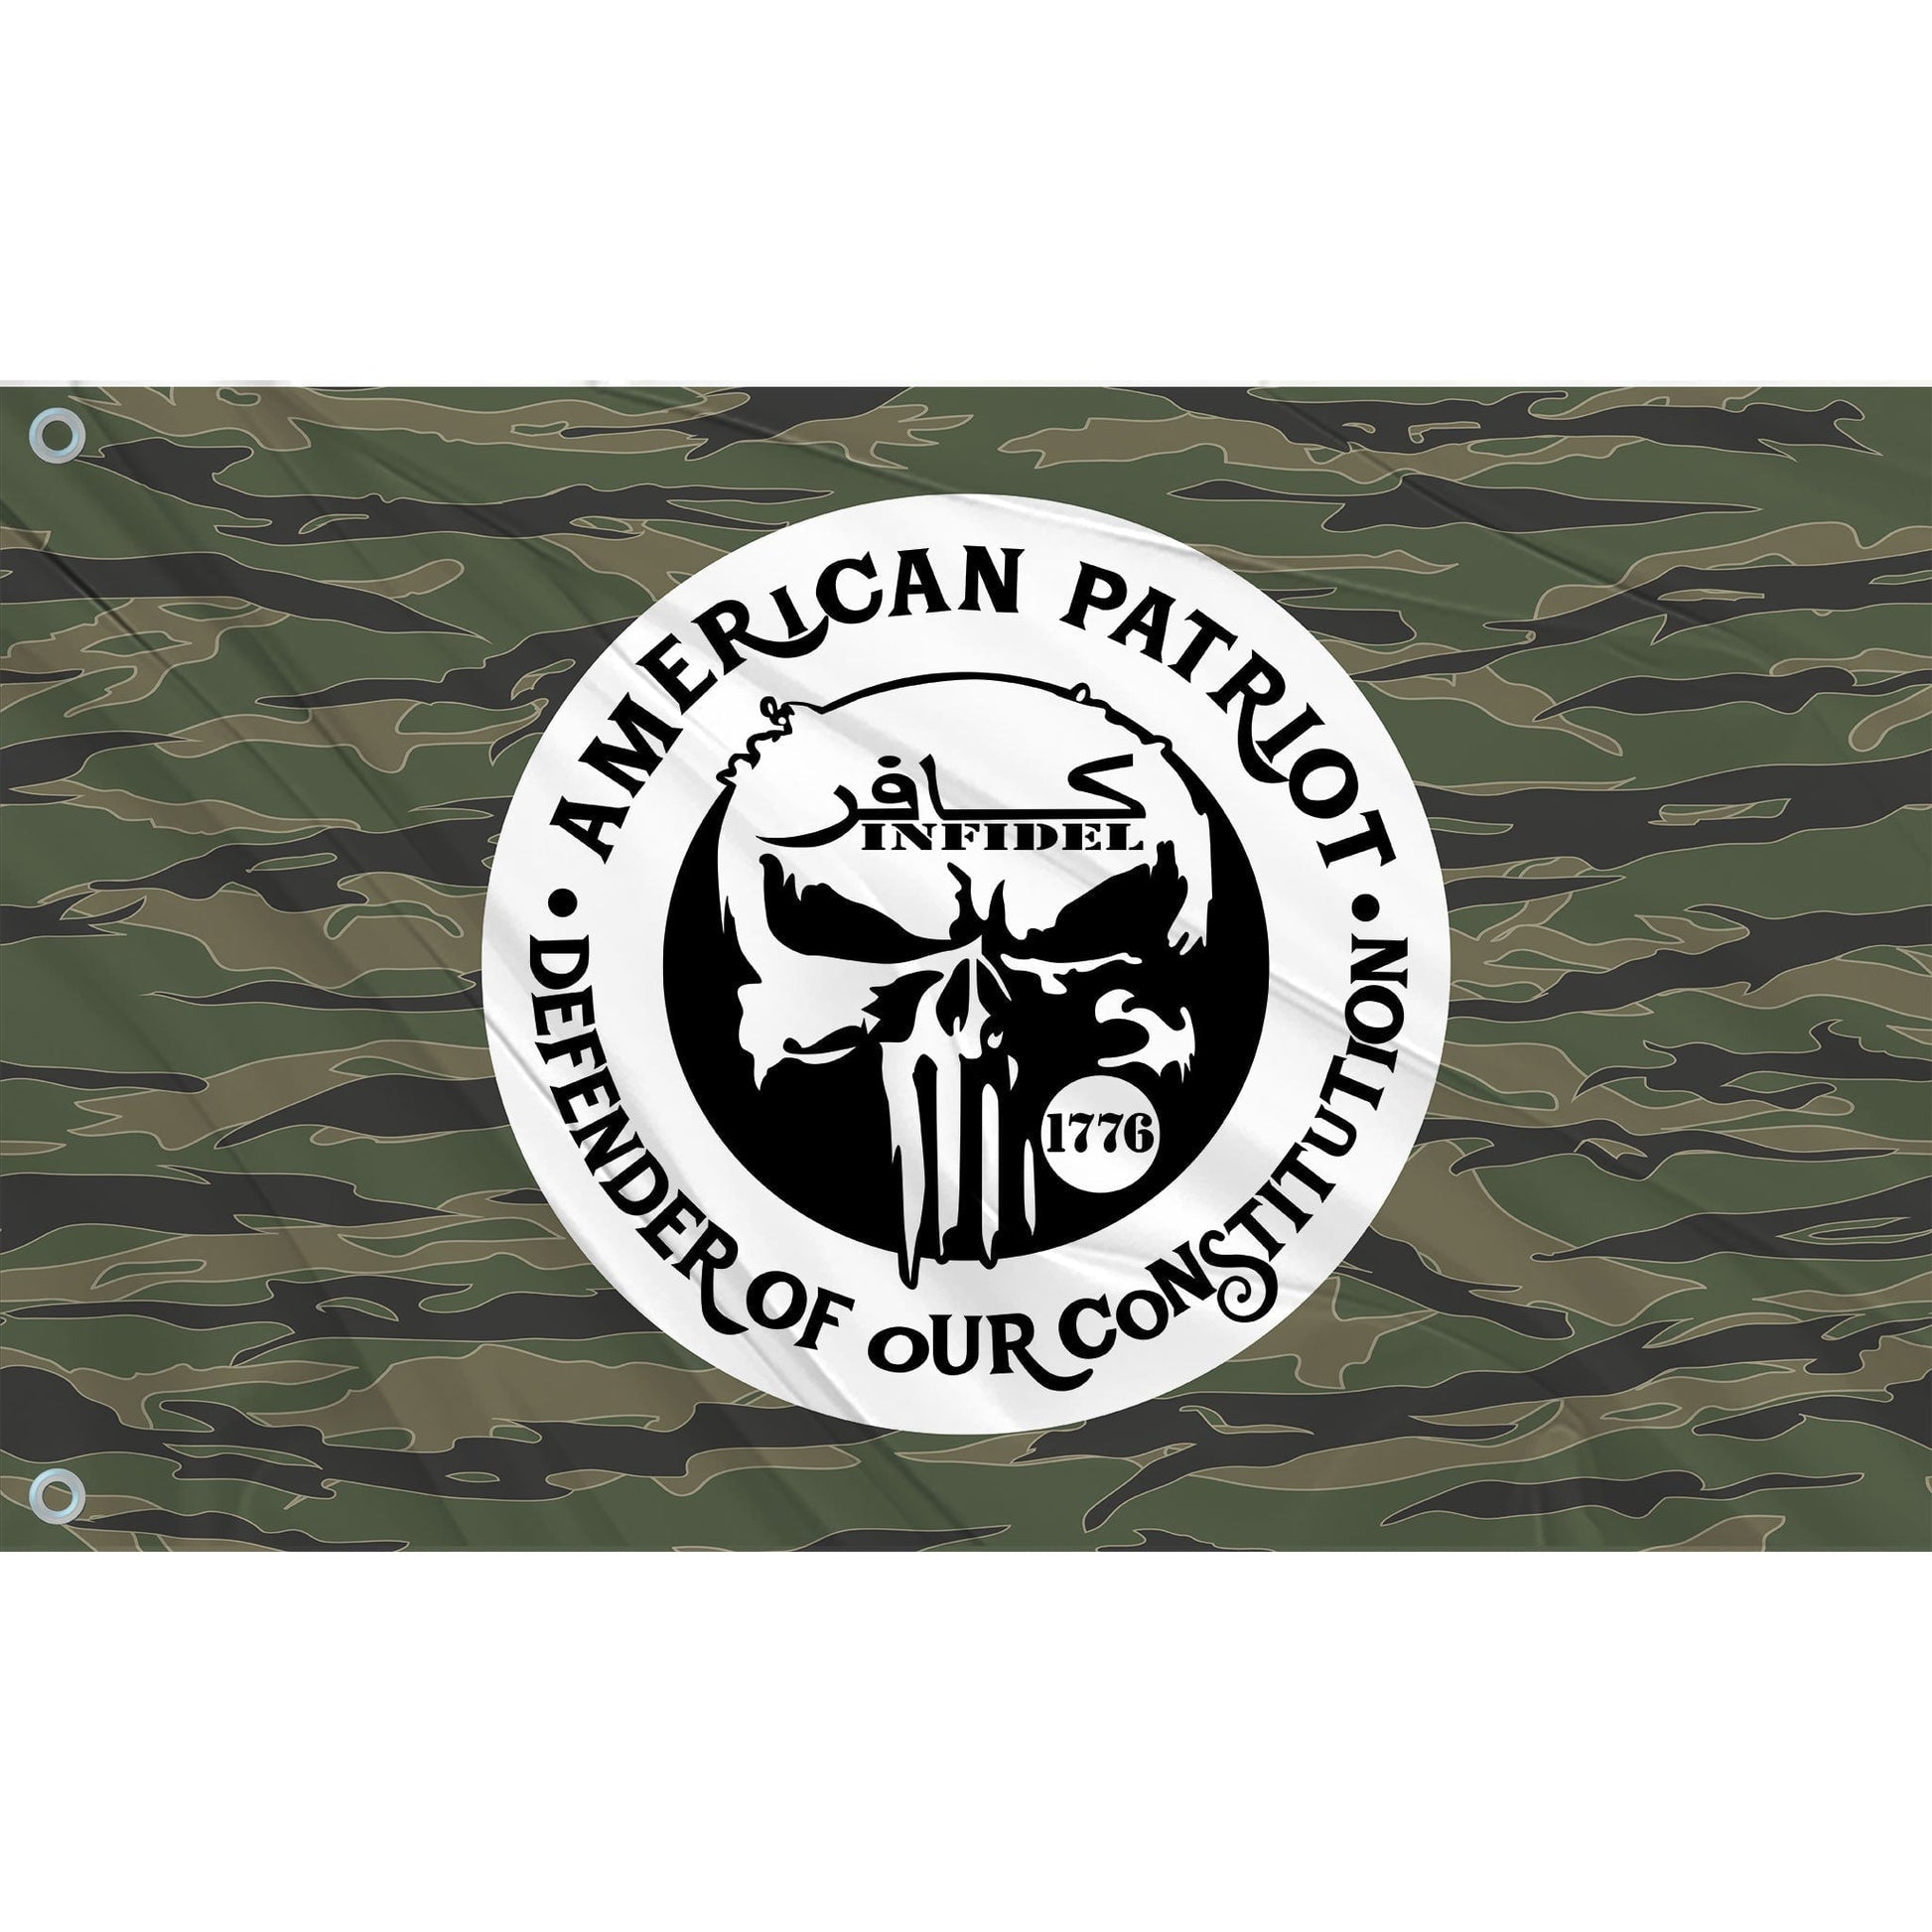 festflags Custom ATV Flags 6 X 9 Inch Rectangle / Single Sided American Patriot Flag - Camo with White